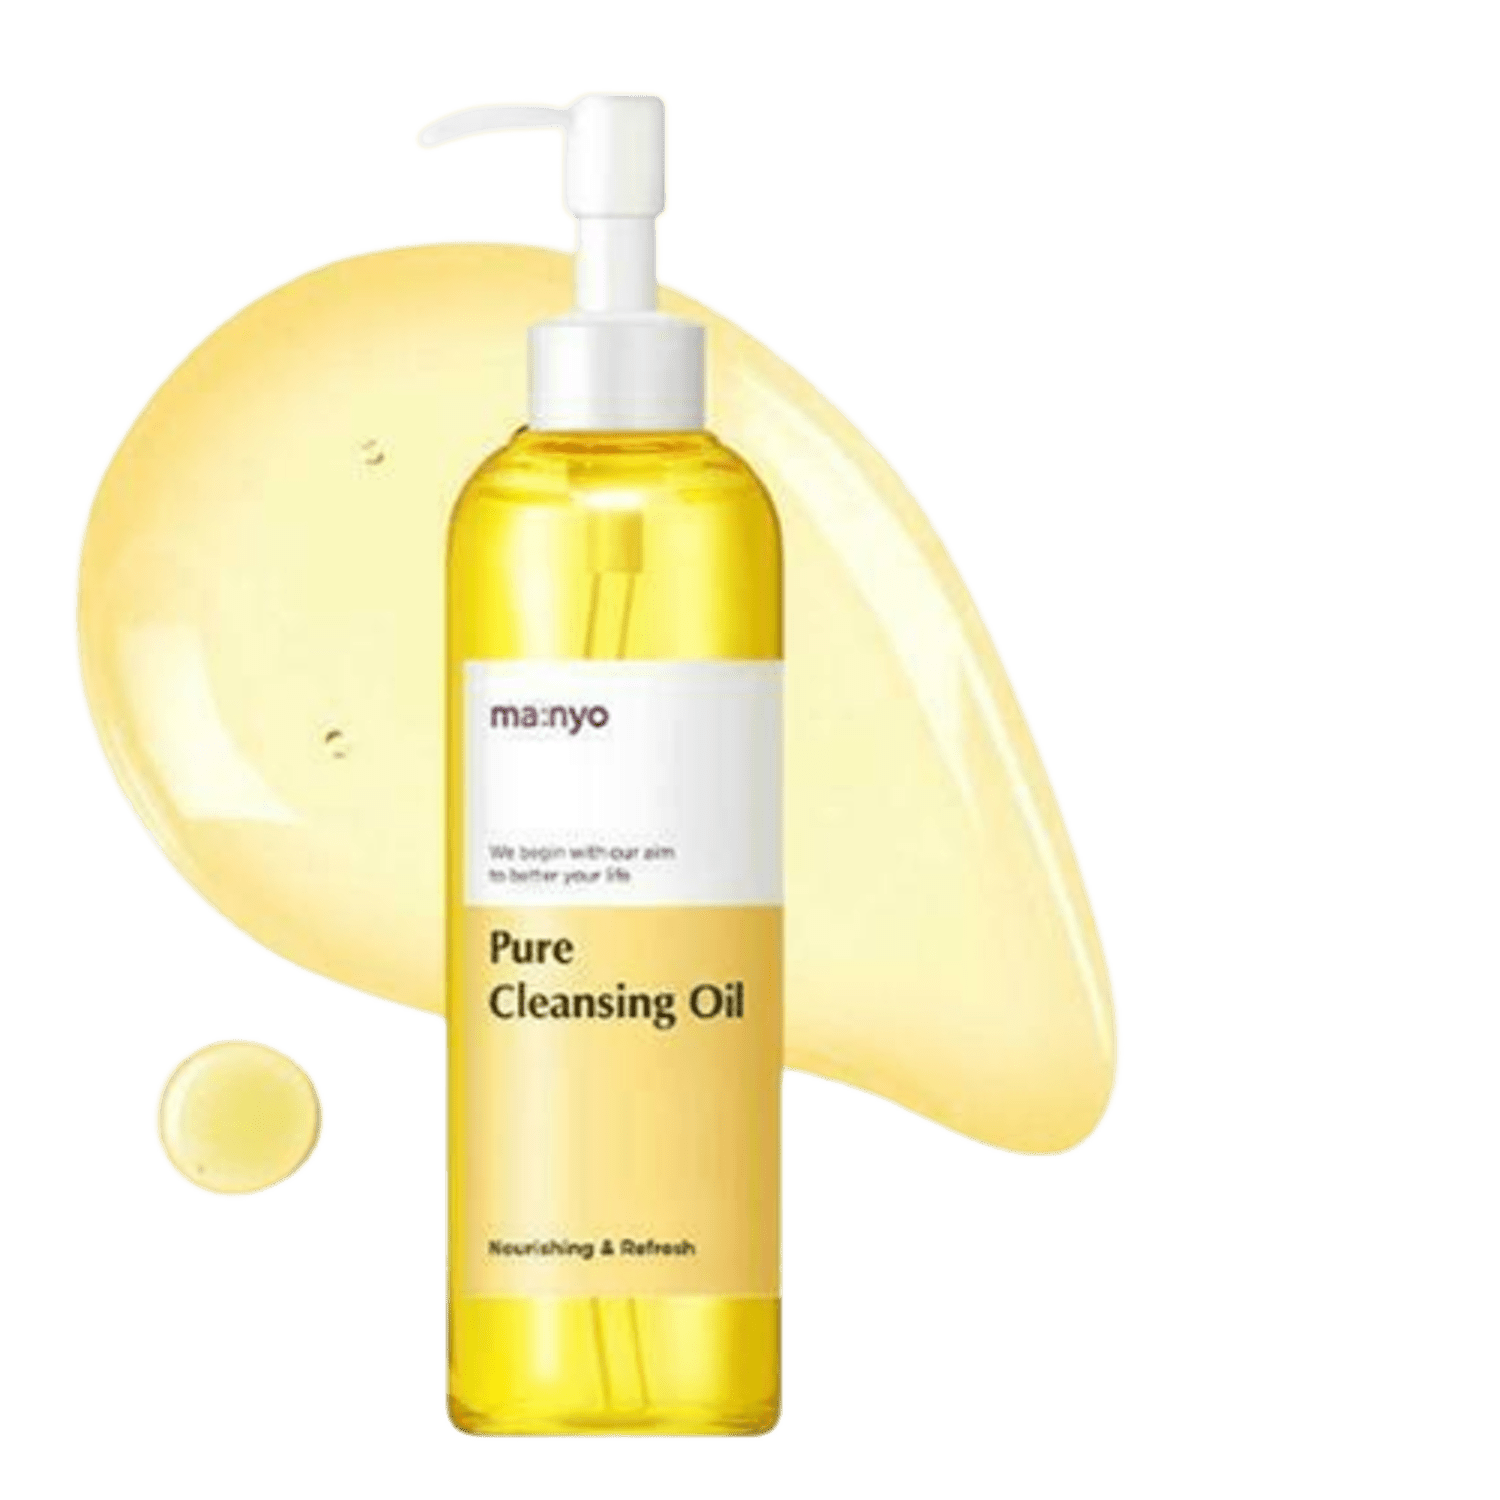 ma:nyo Pure Cleansing Oil 200ml - Kpop Wholesale | Seoufly